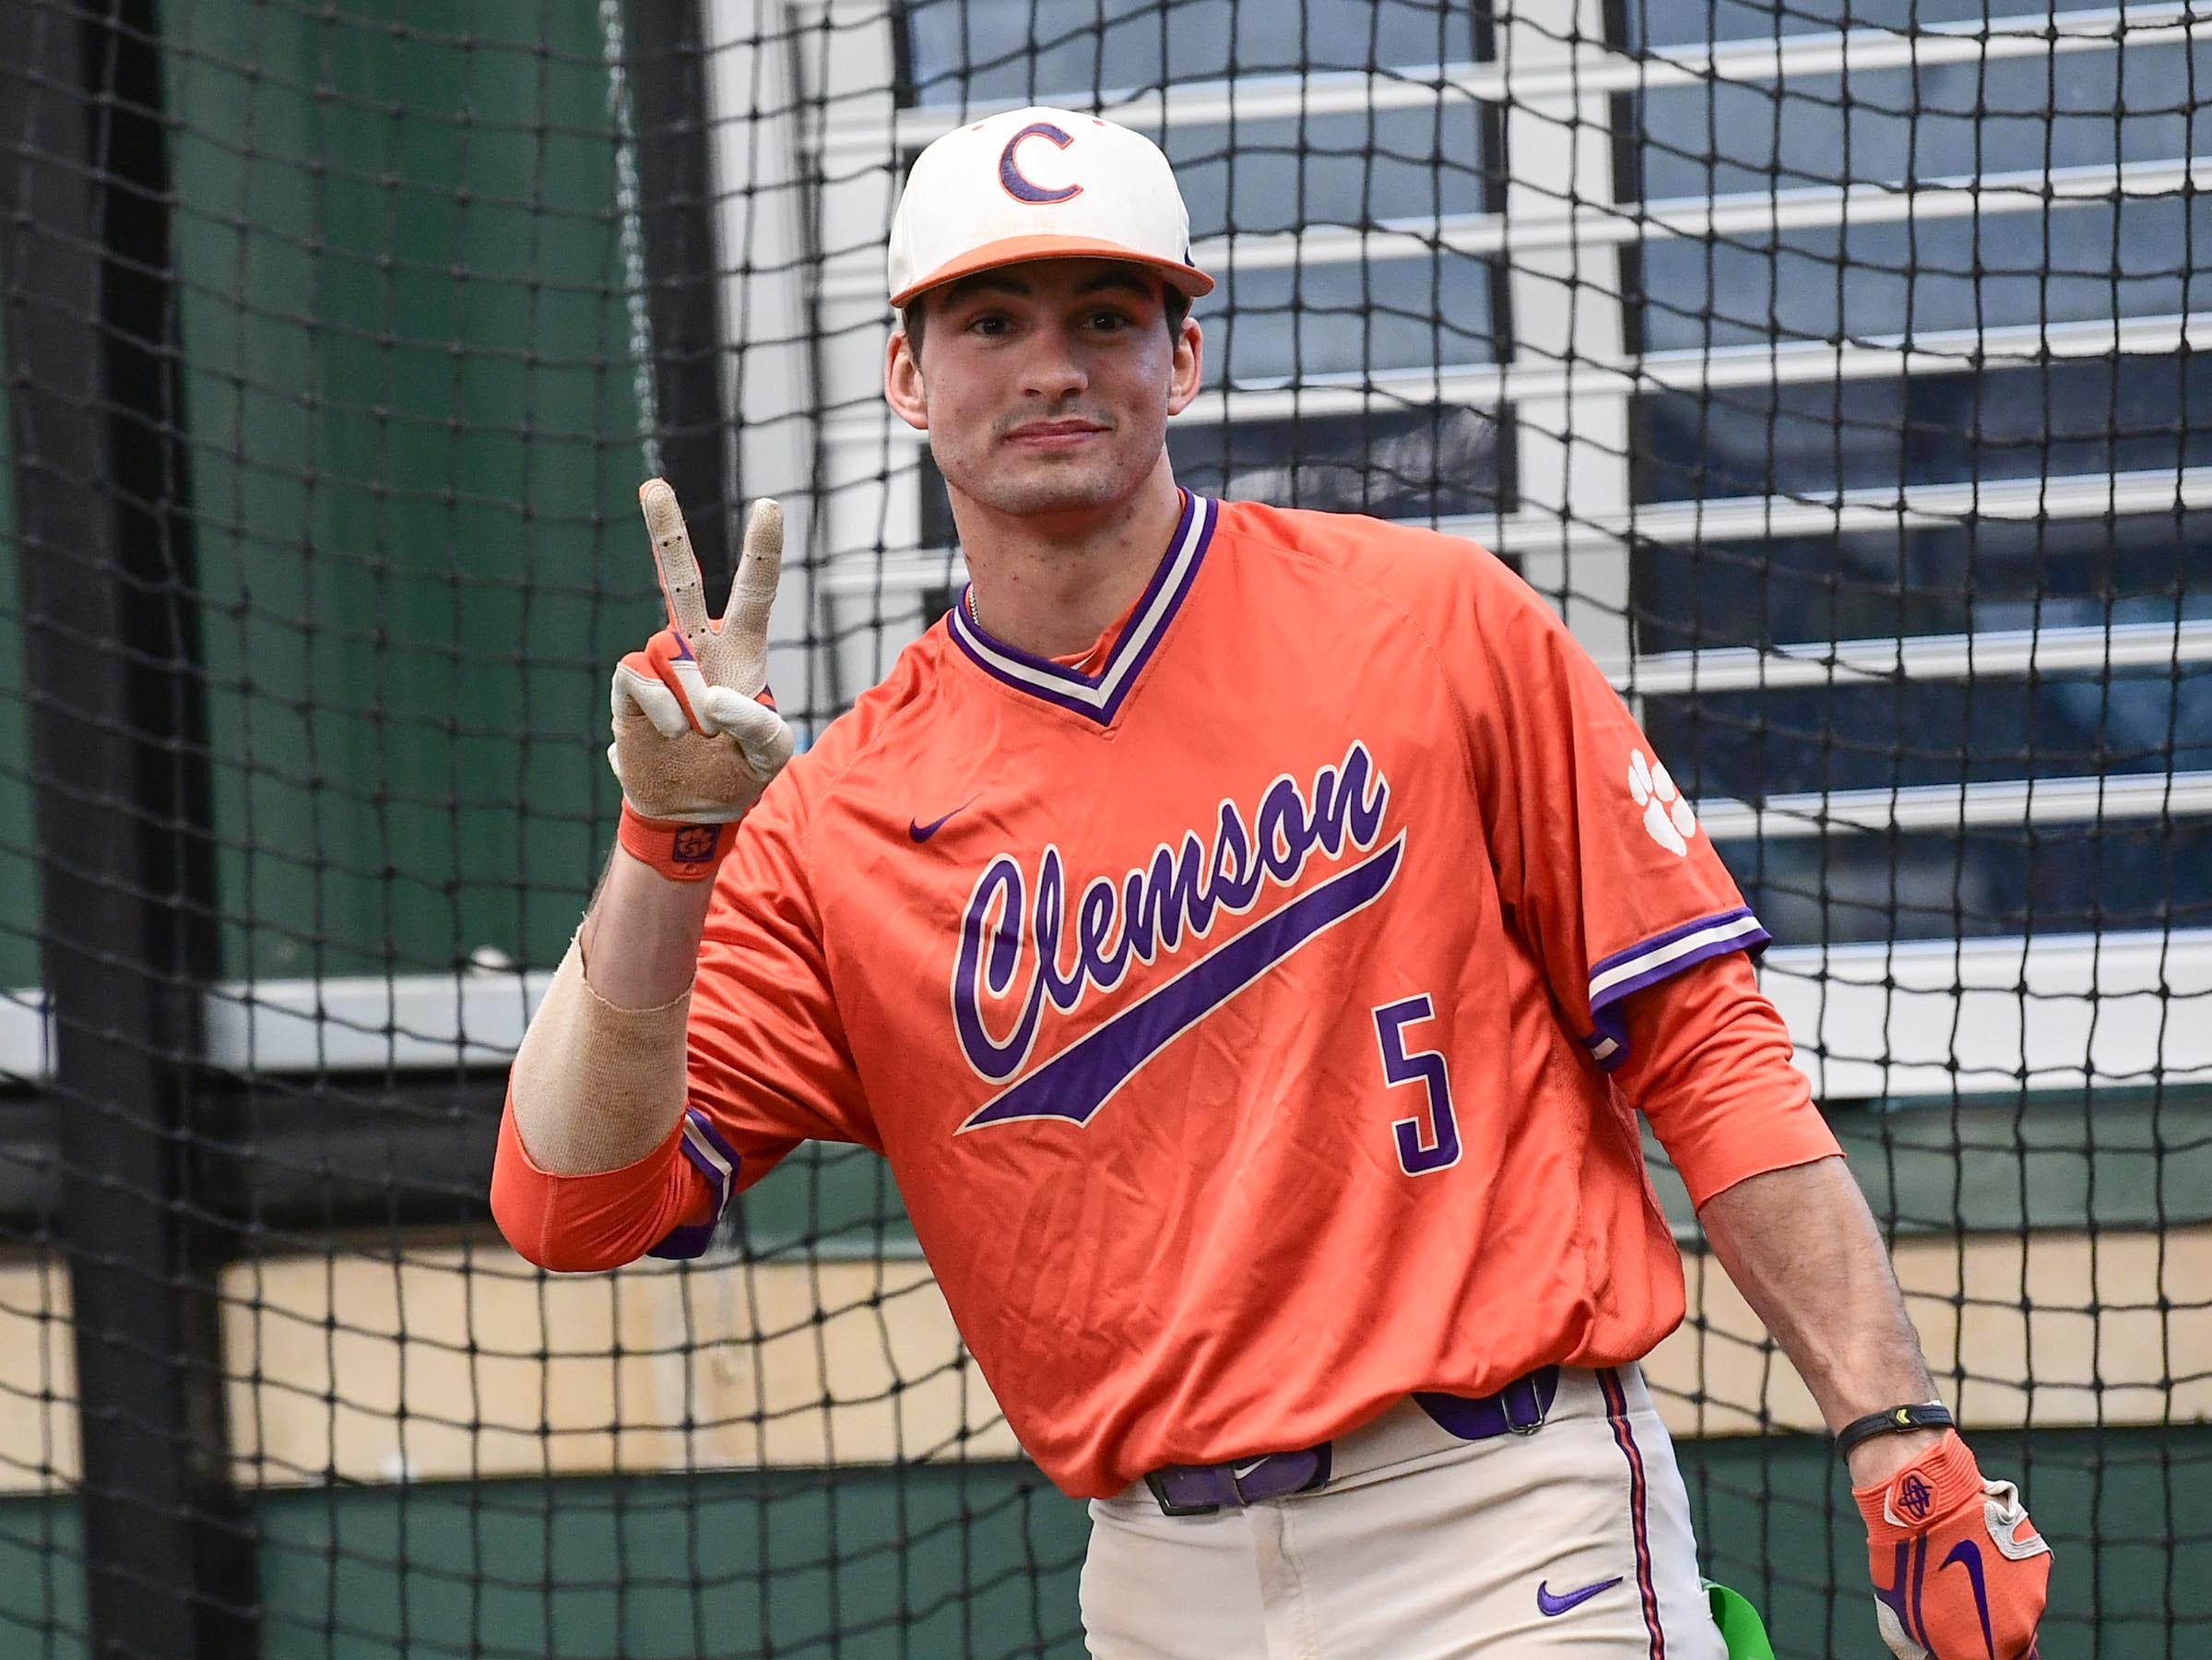 Clemson sophomore Sam Hall(5) during batting practice at the first official team Spring practice at Doug Kingsmore Stadium in Clemson Friday, January 24, 2020.